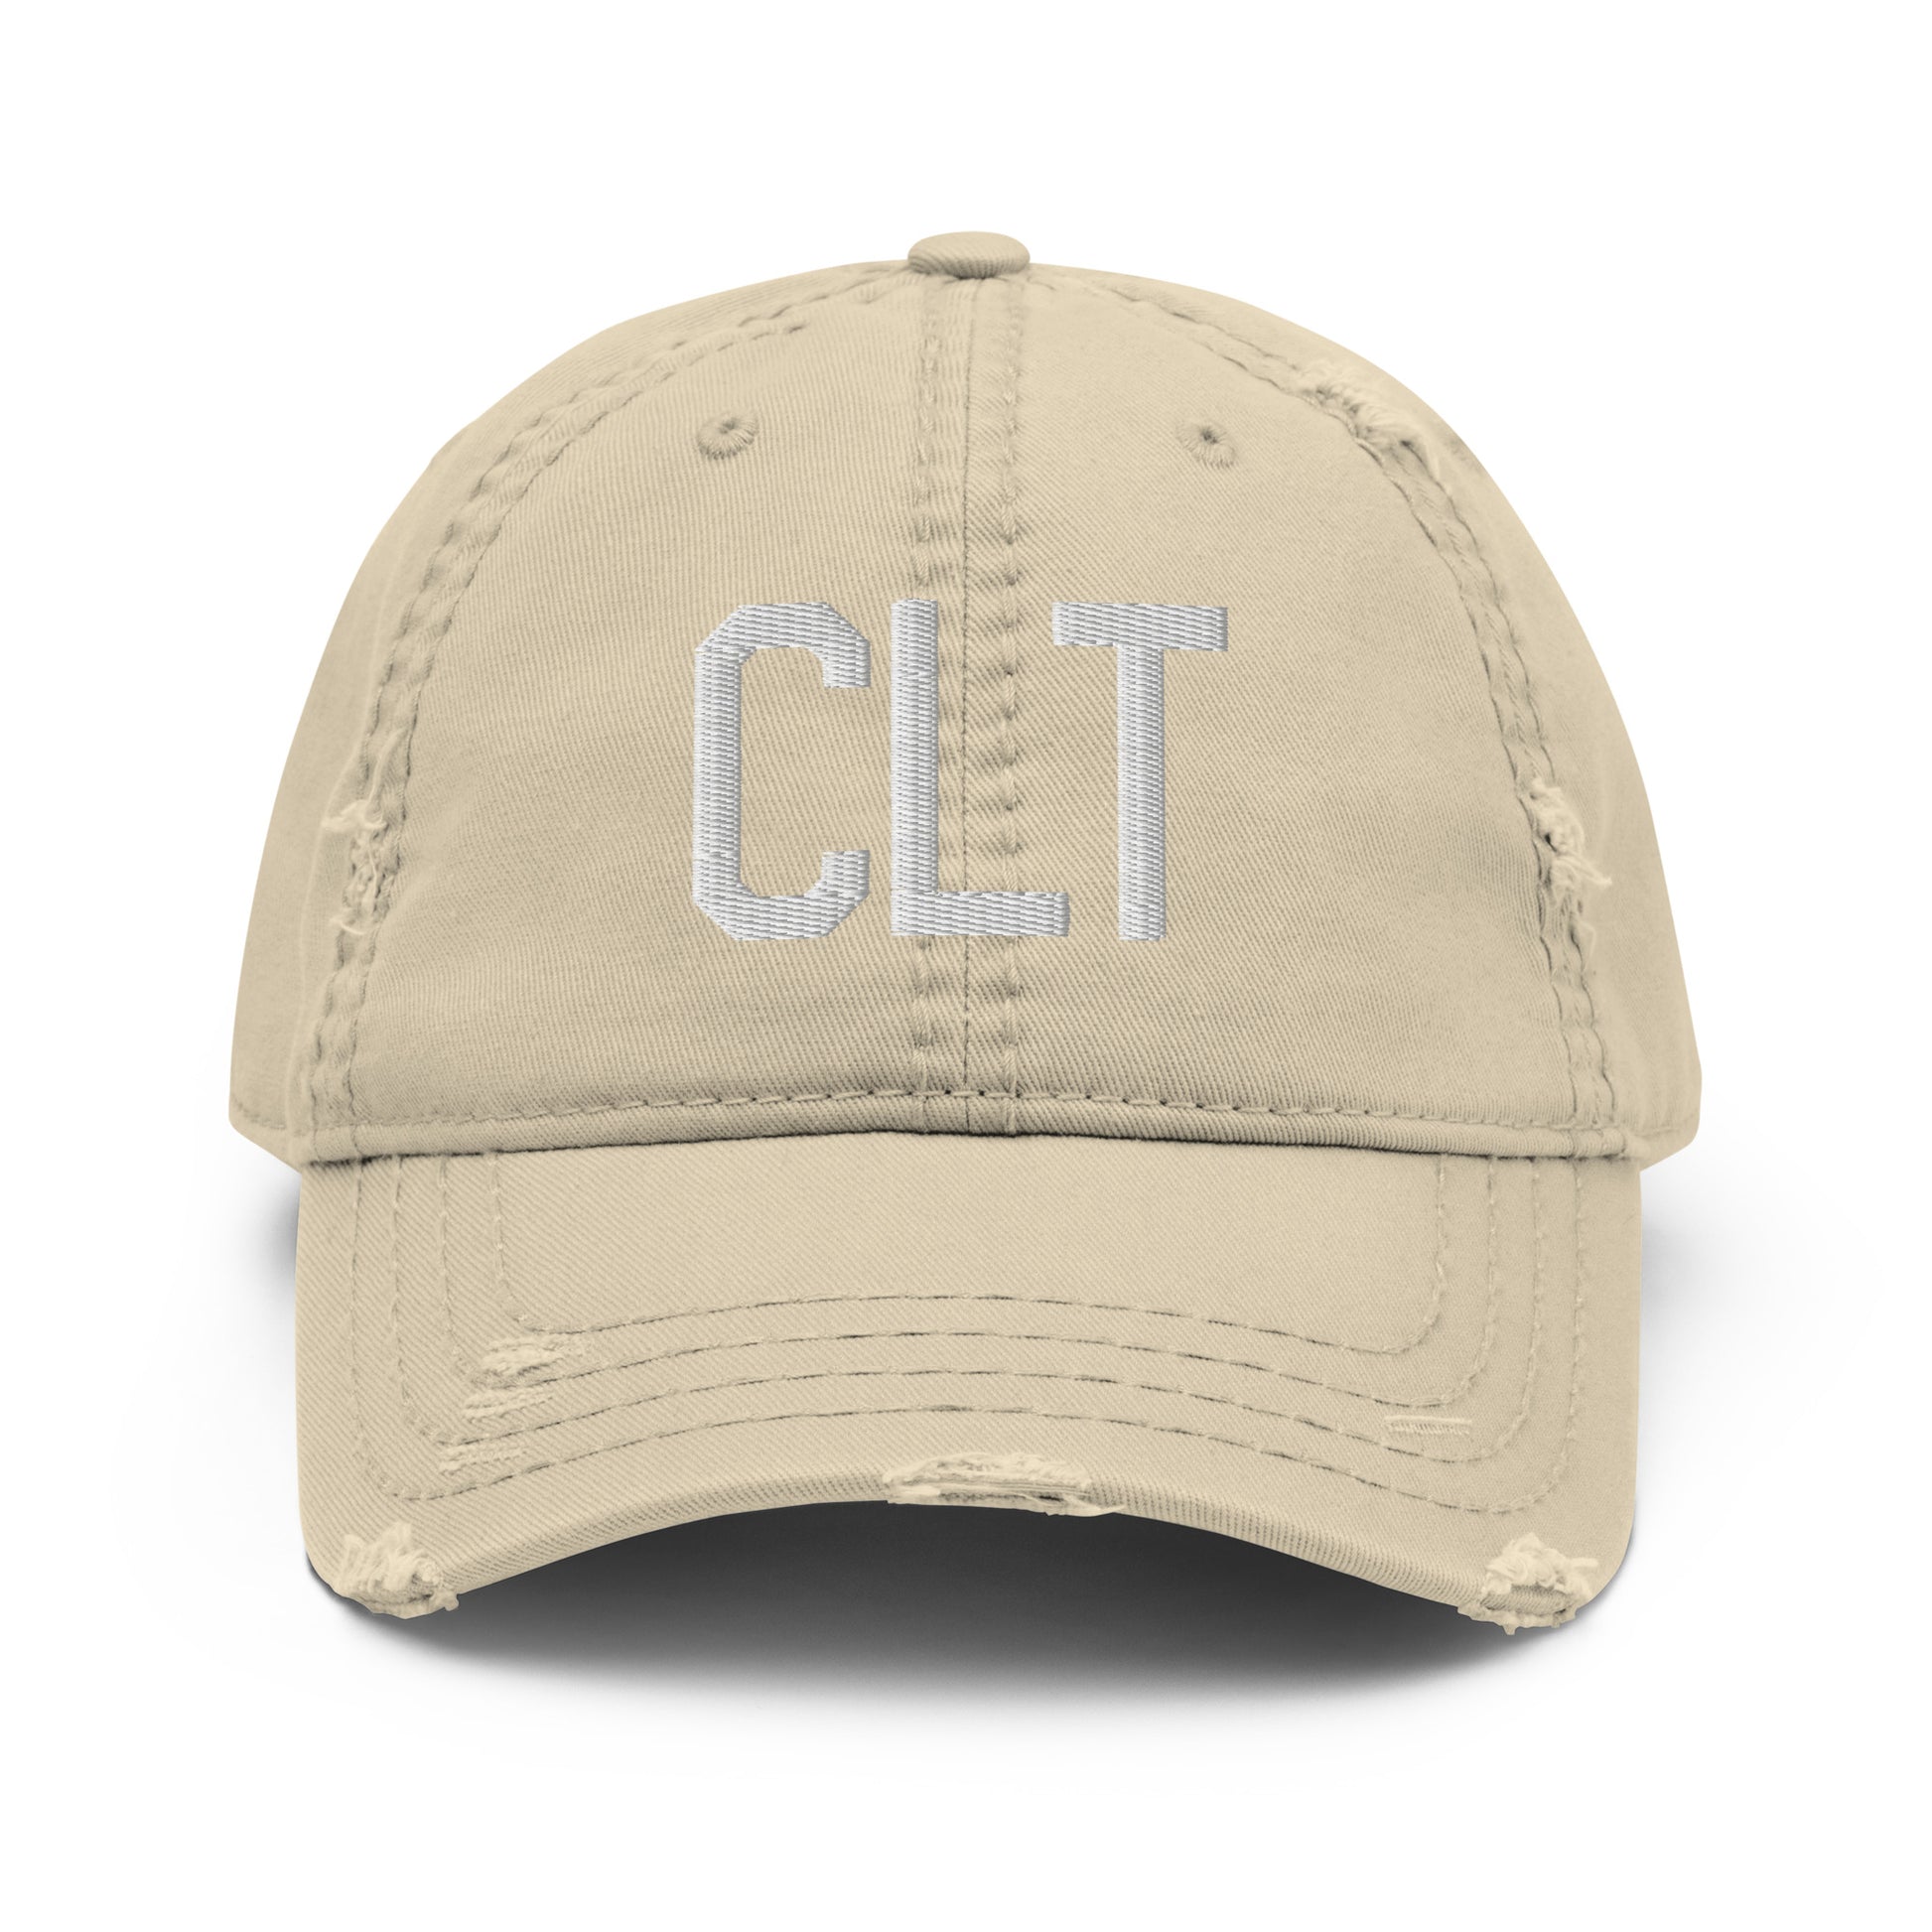 Airport Code Distressed Hat - White • CLT Charlotte • YHM Designs - Image 18